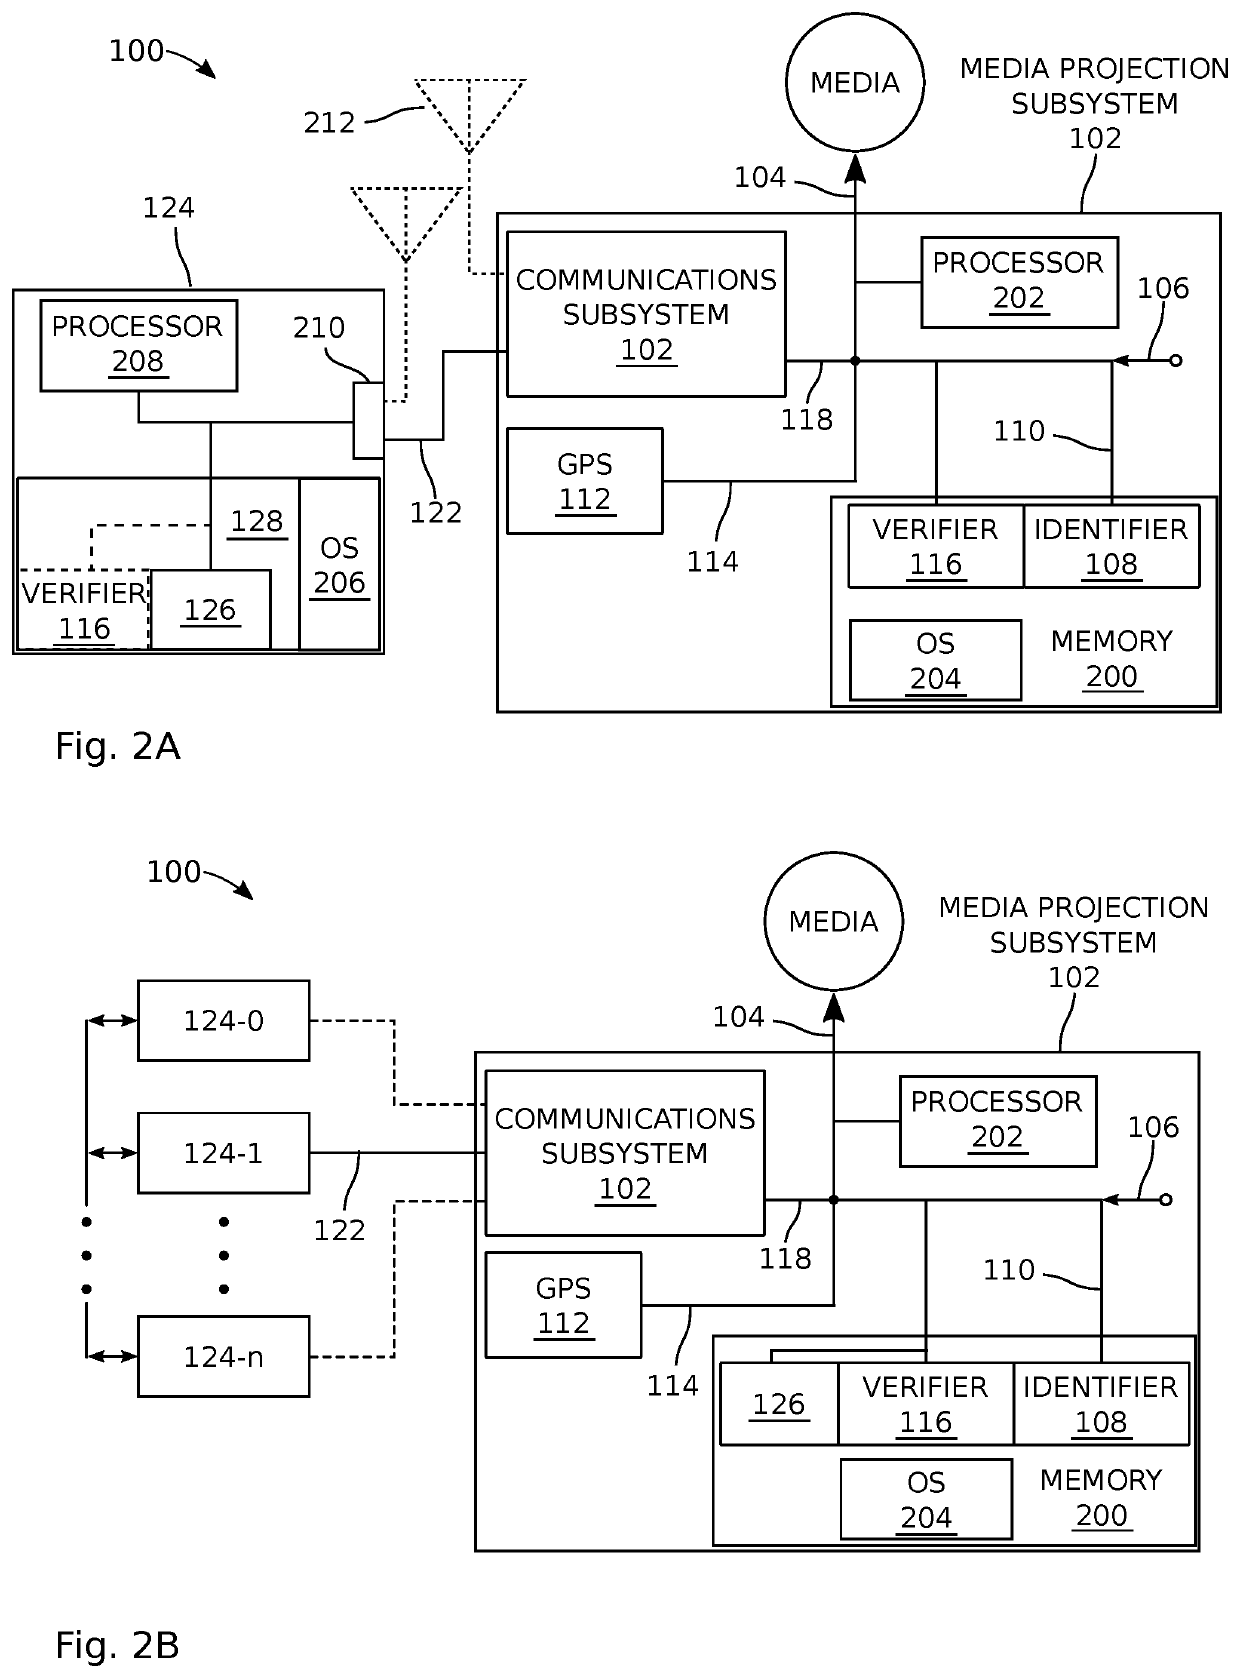 System and Method for Targeting the Distribution of Media from a Mobile Platform